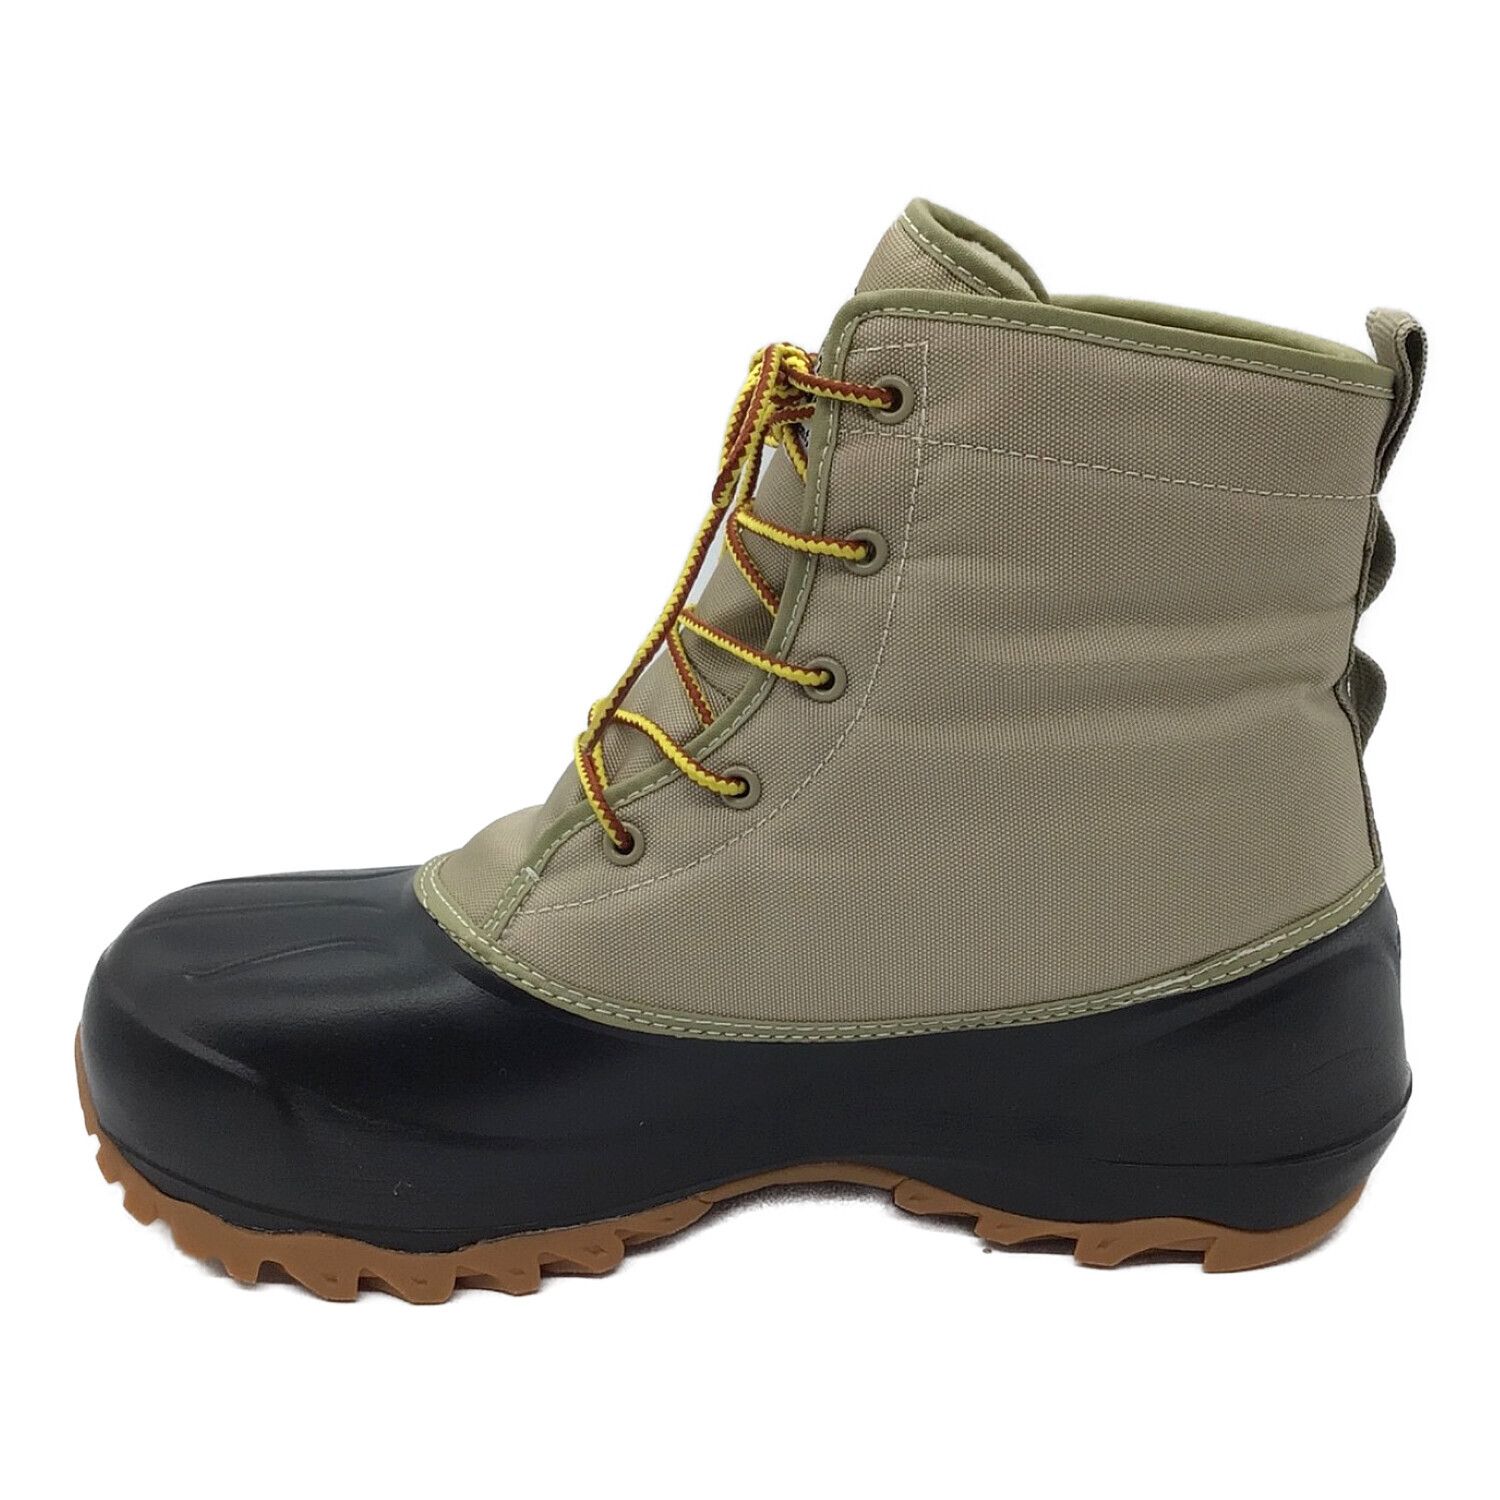 THE NORTH FACE (ザ ノース フェイス) SNOW SHOT 6 BOOTS NF51860